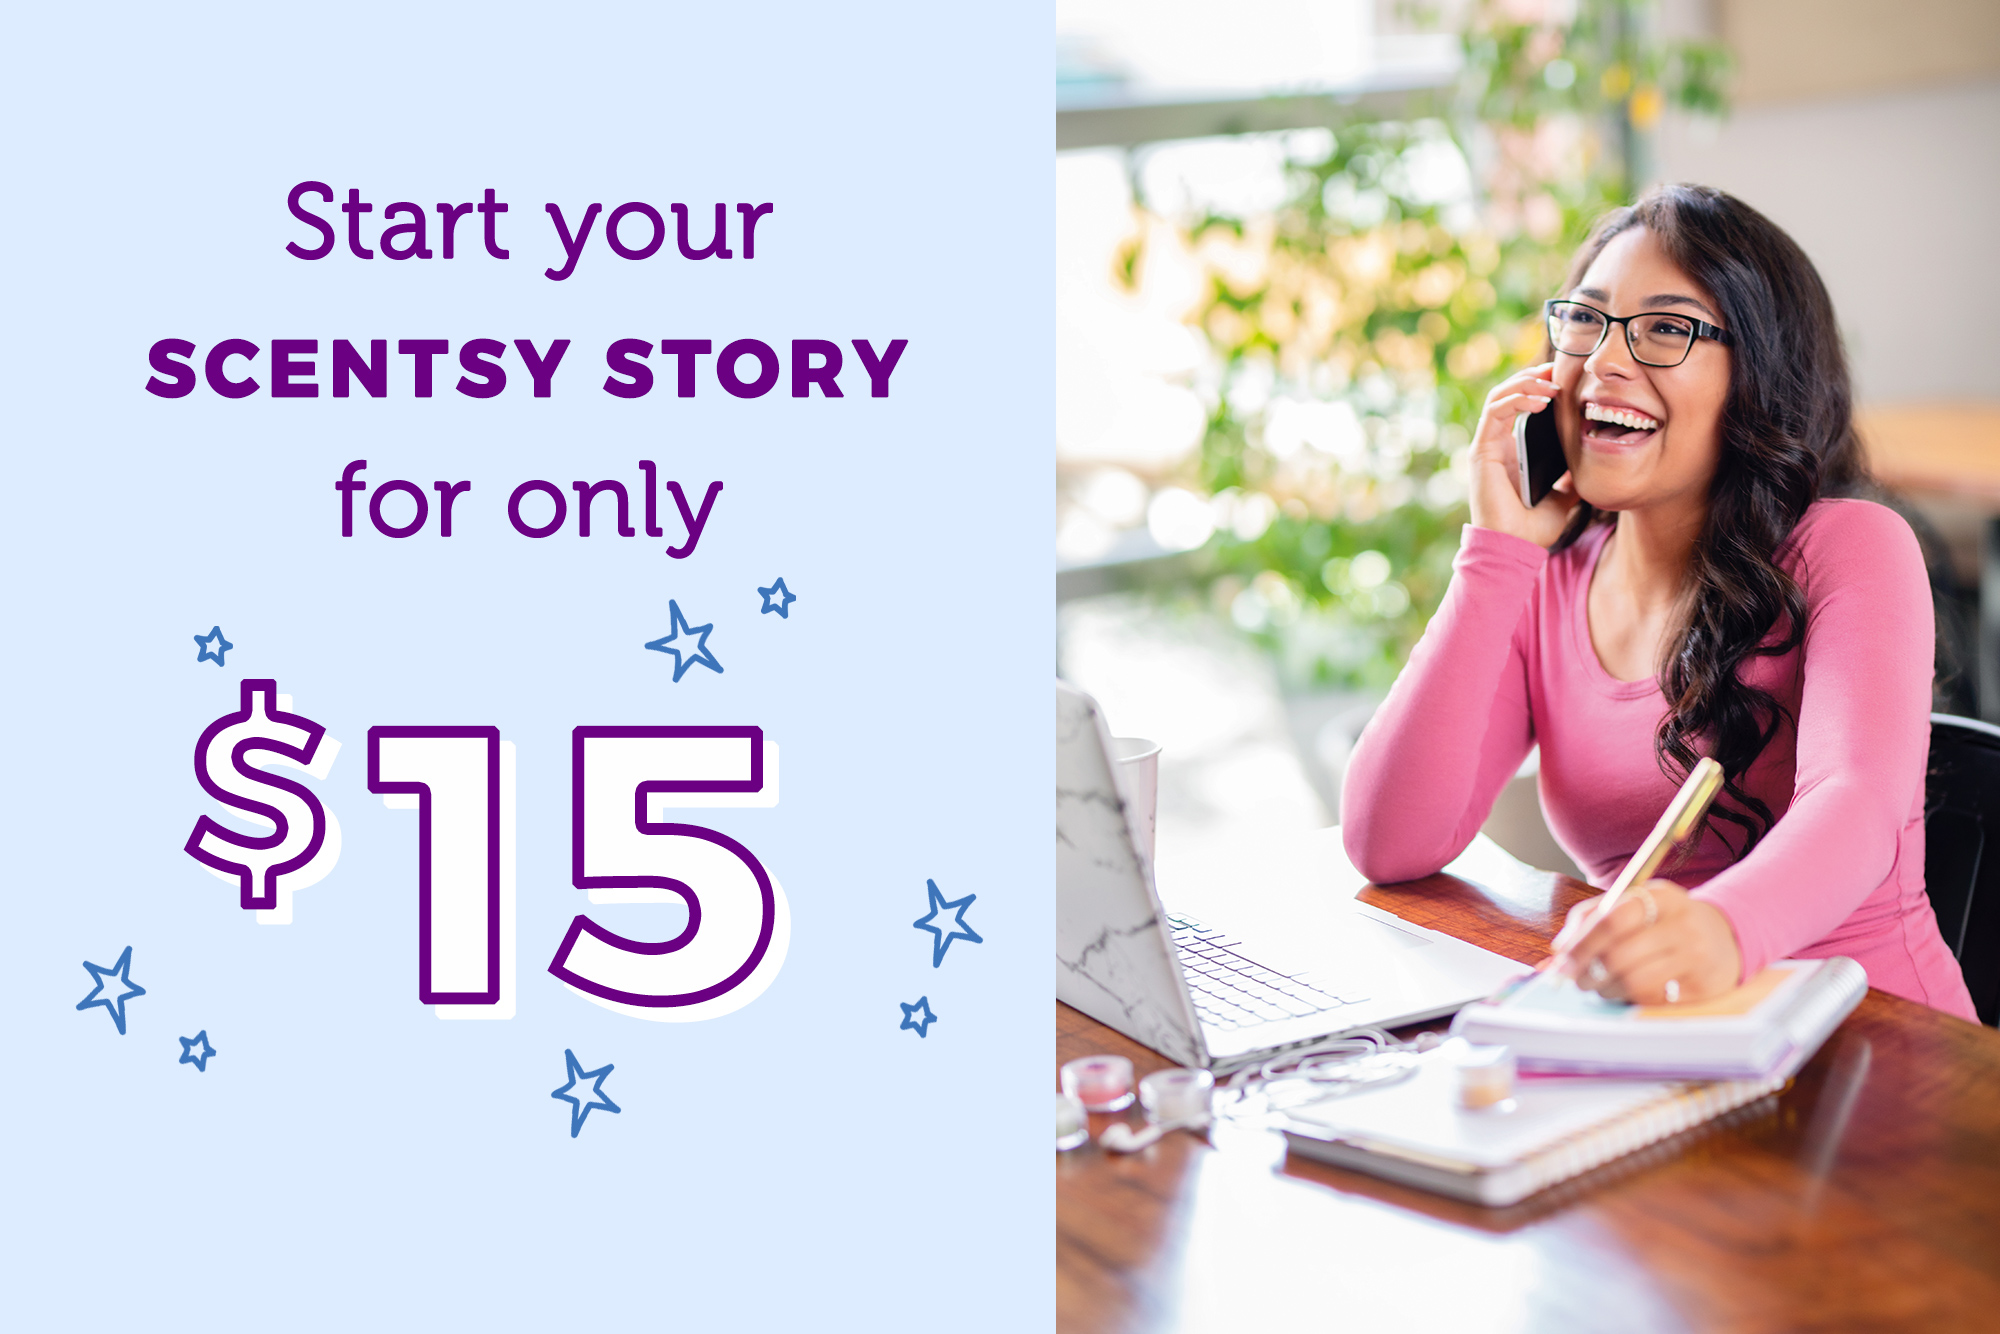 Start your Scentsy Story for only $15 at scentsy.com/join